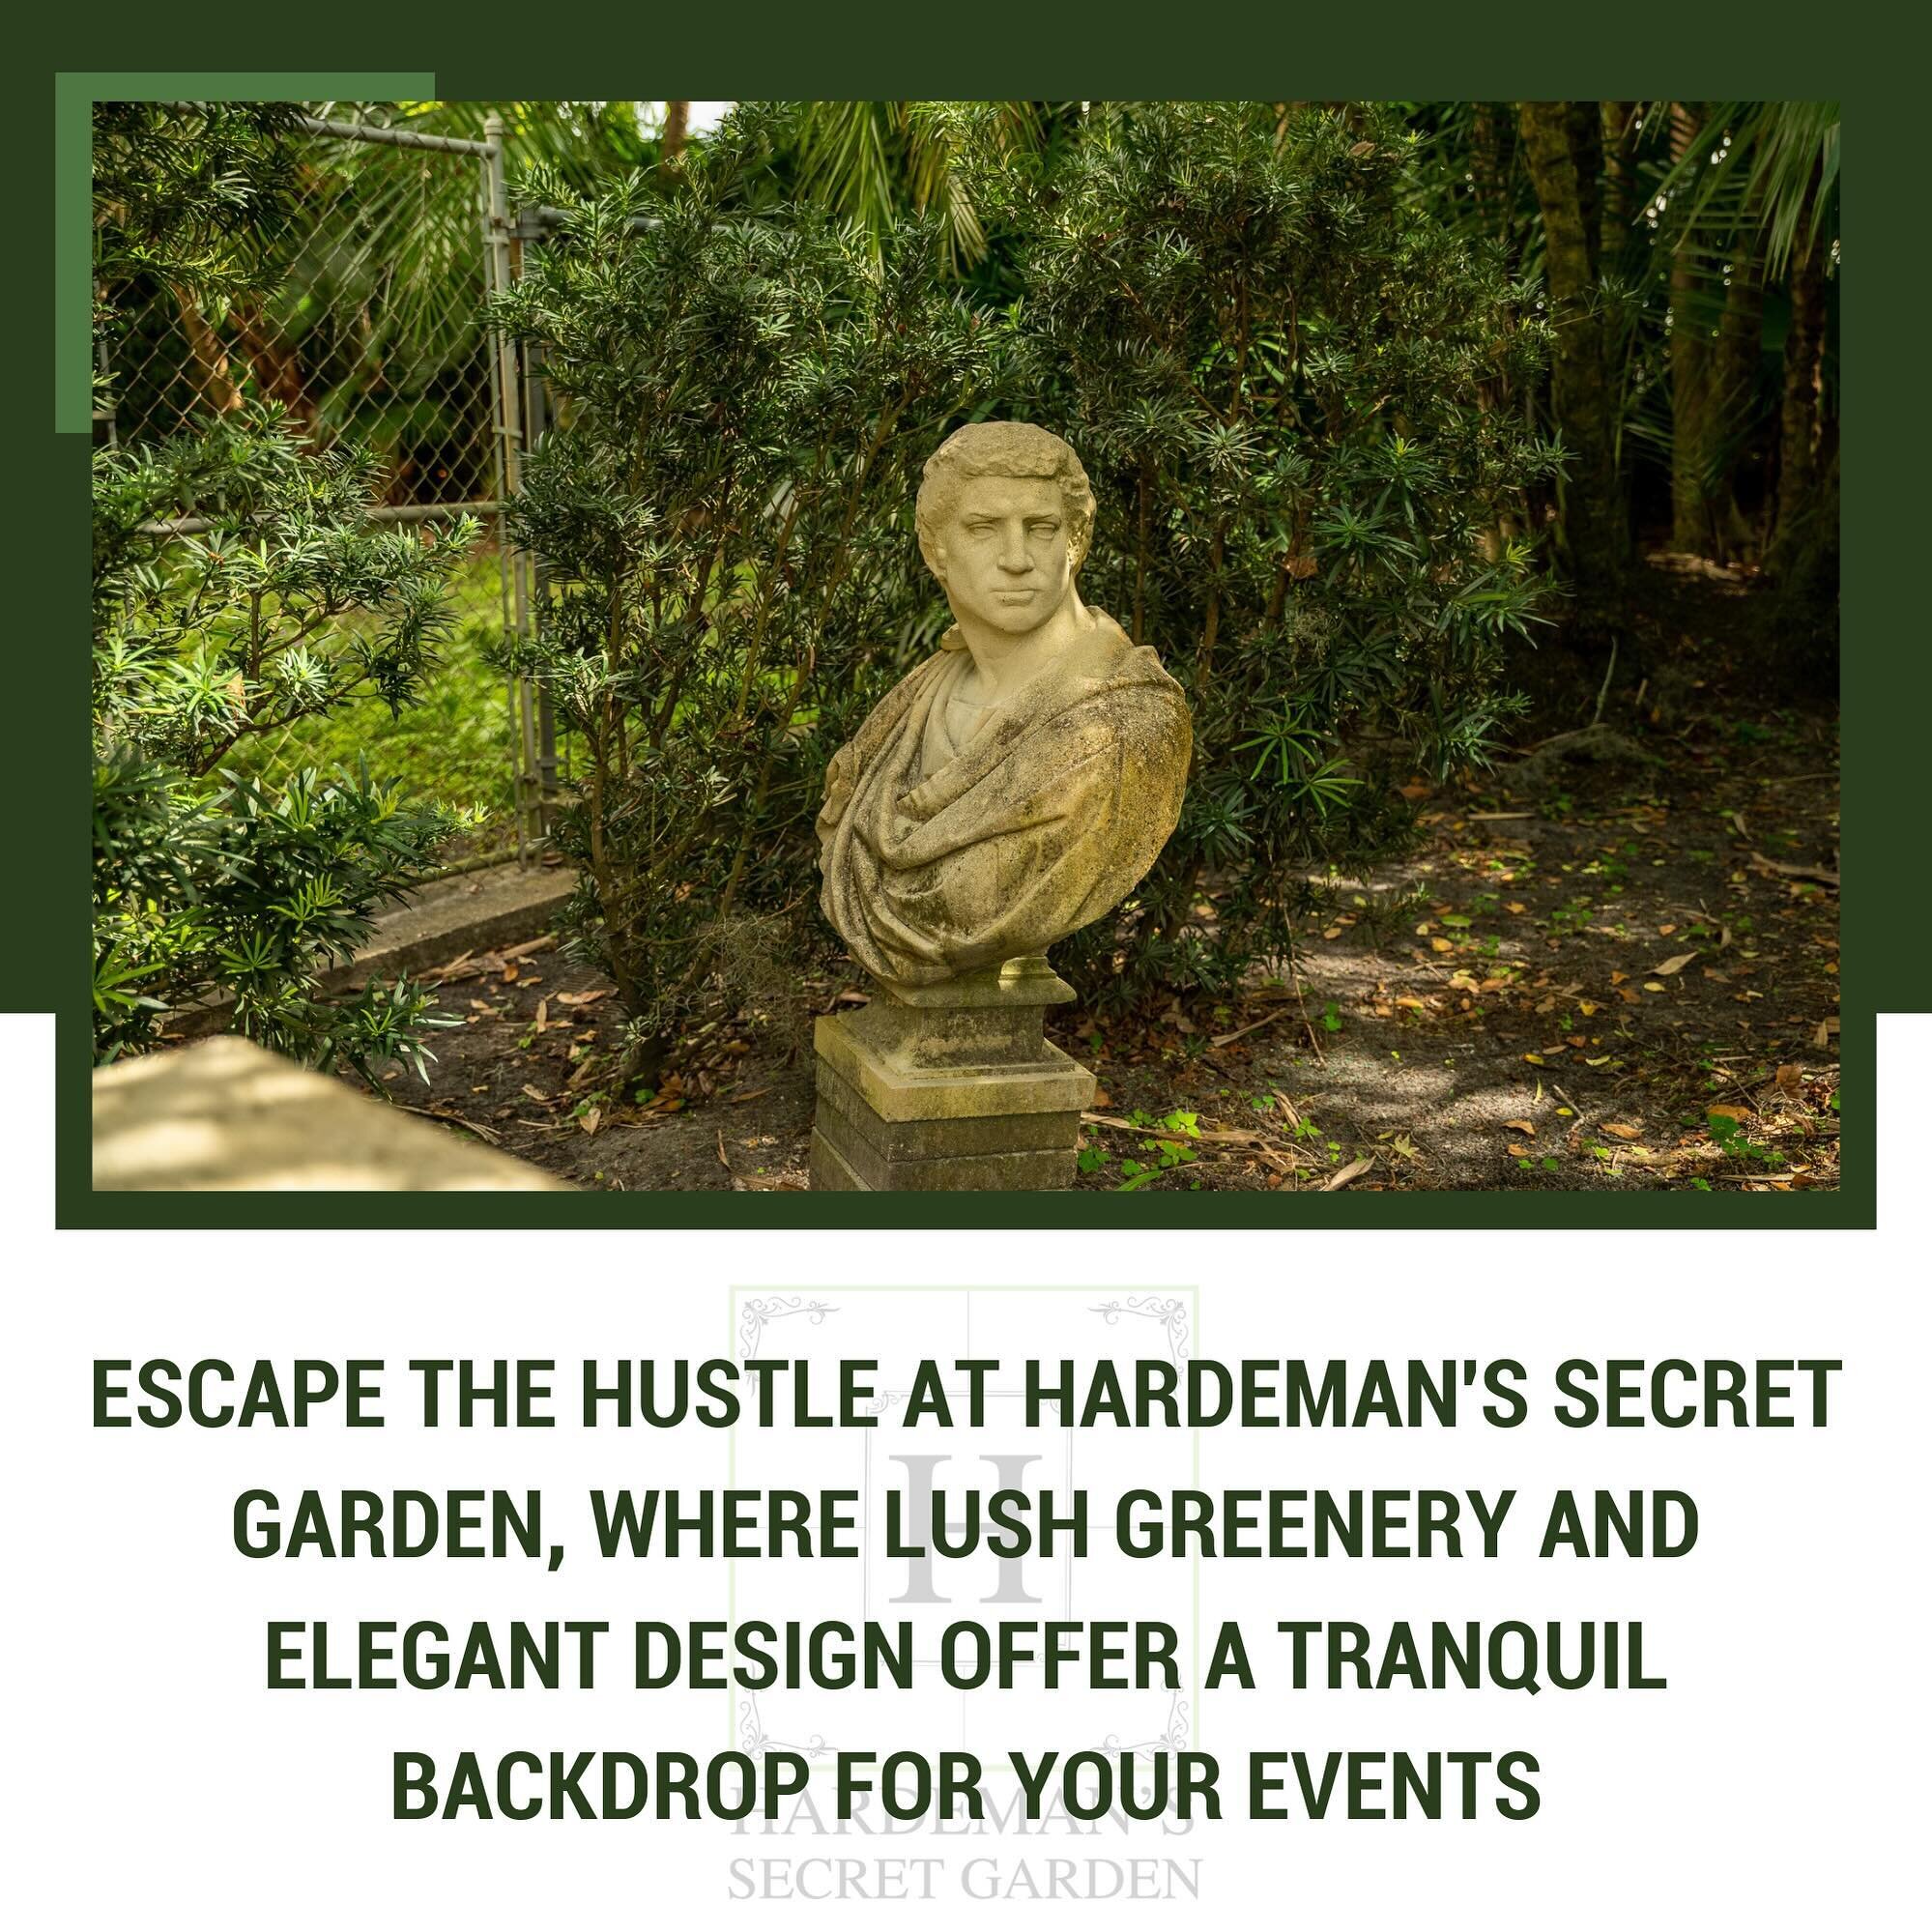 Escape the urban hustle at Hardeman&rsquo;s Secret Garden, where lush greenery and elegant design offer a tranquil backdrop for your events!

https://www.hardemanssecretgarden.com/
#hardemanssecretgarden #weddings #weddingreceptions #weddingvenue #we